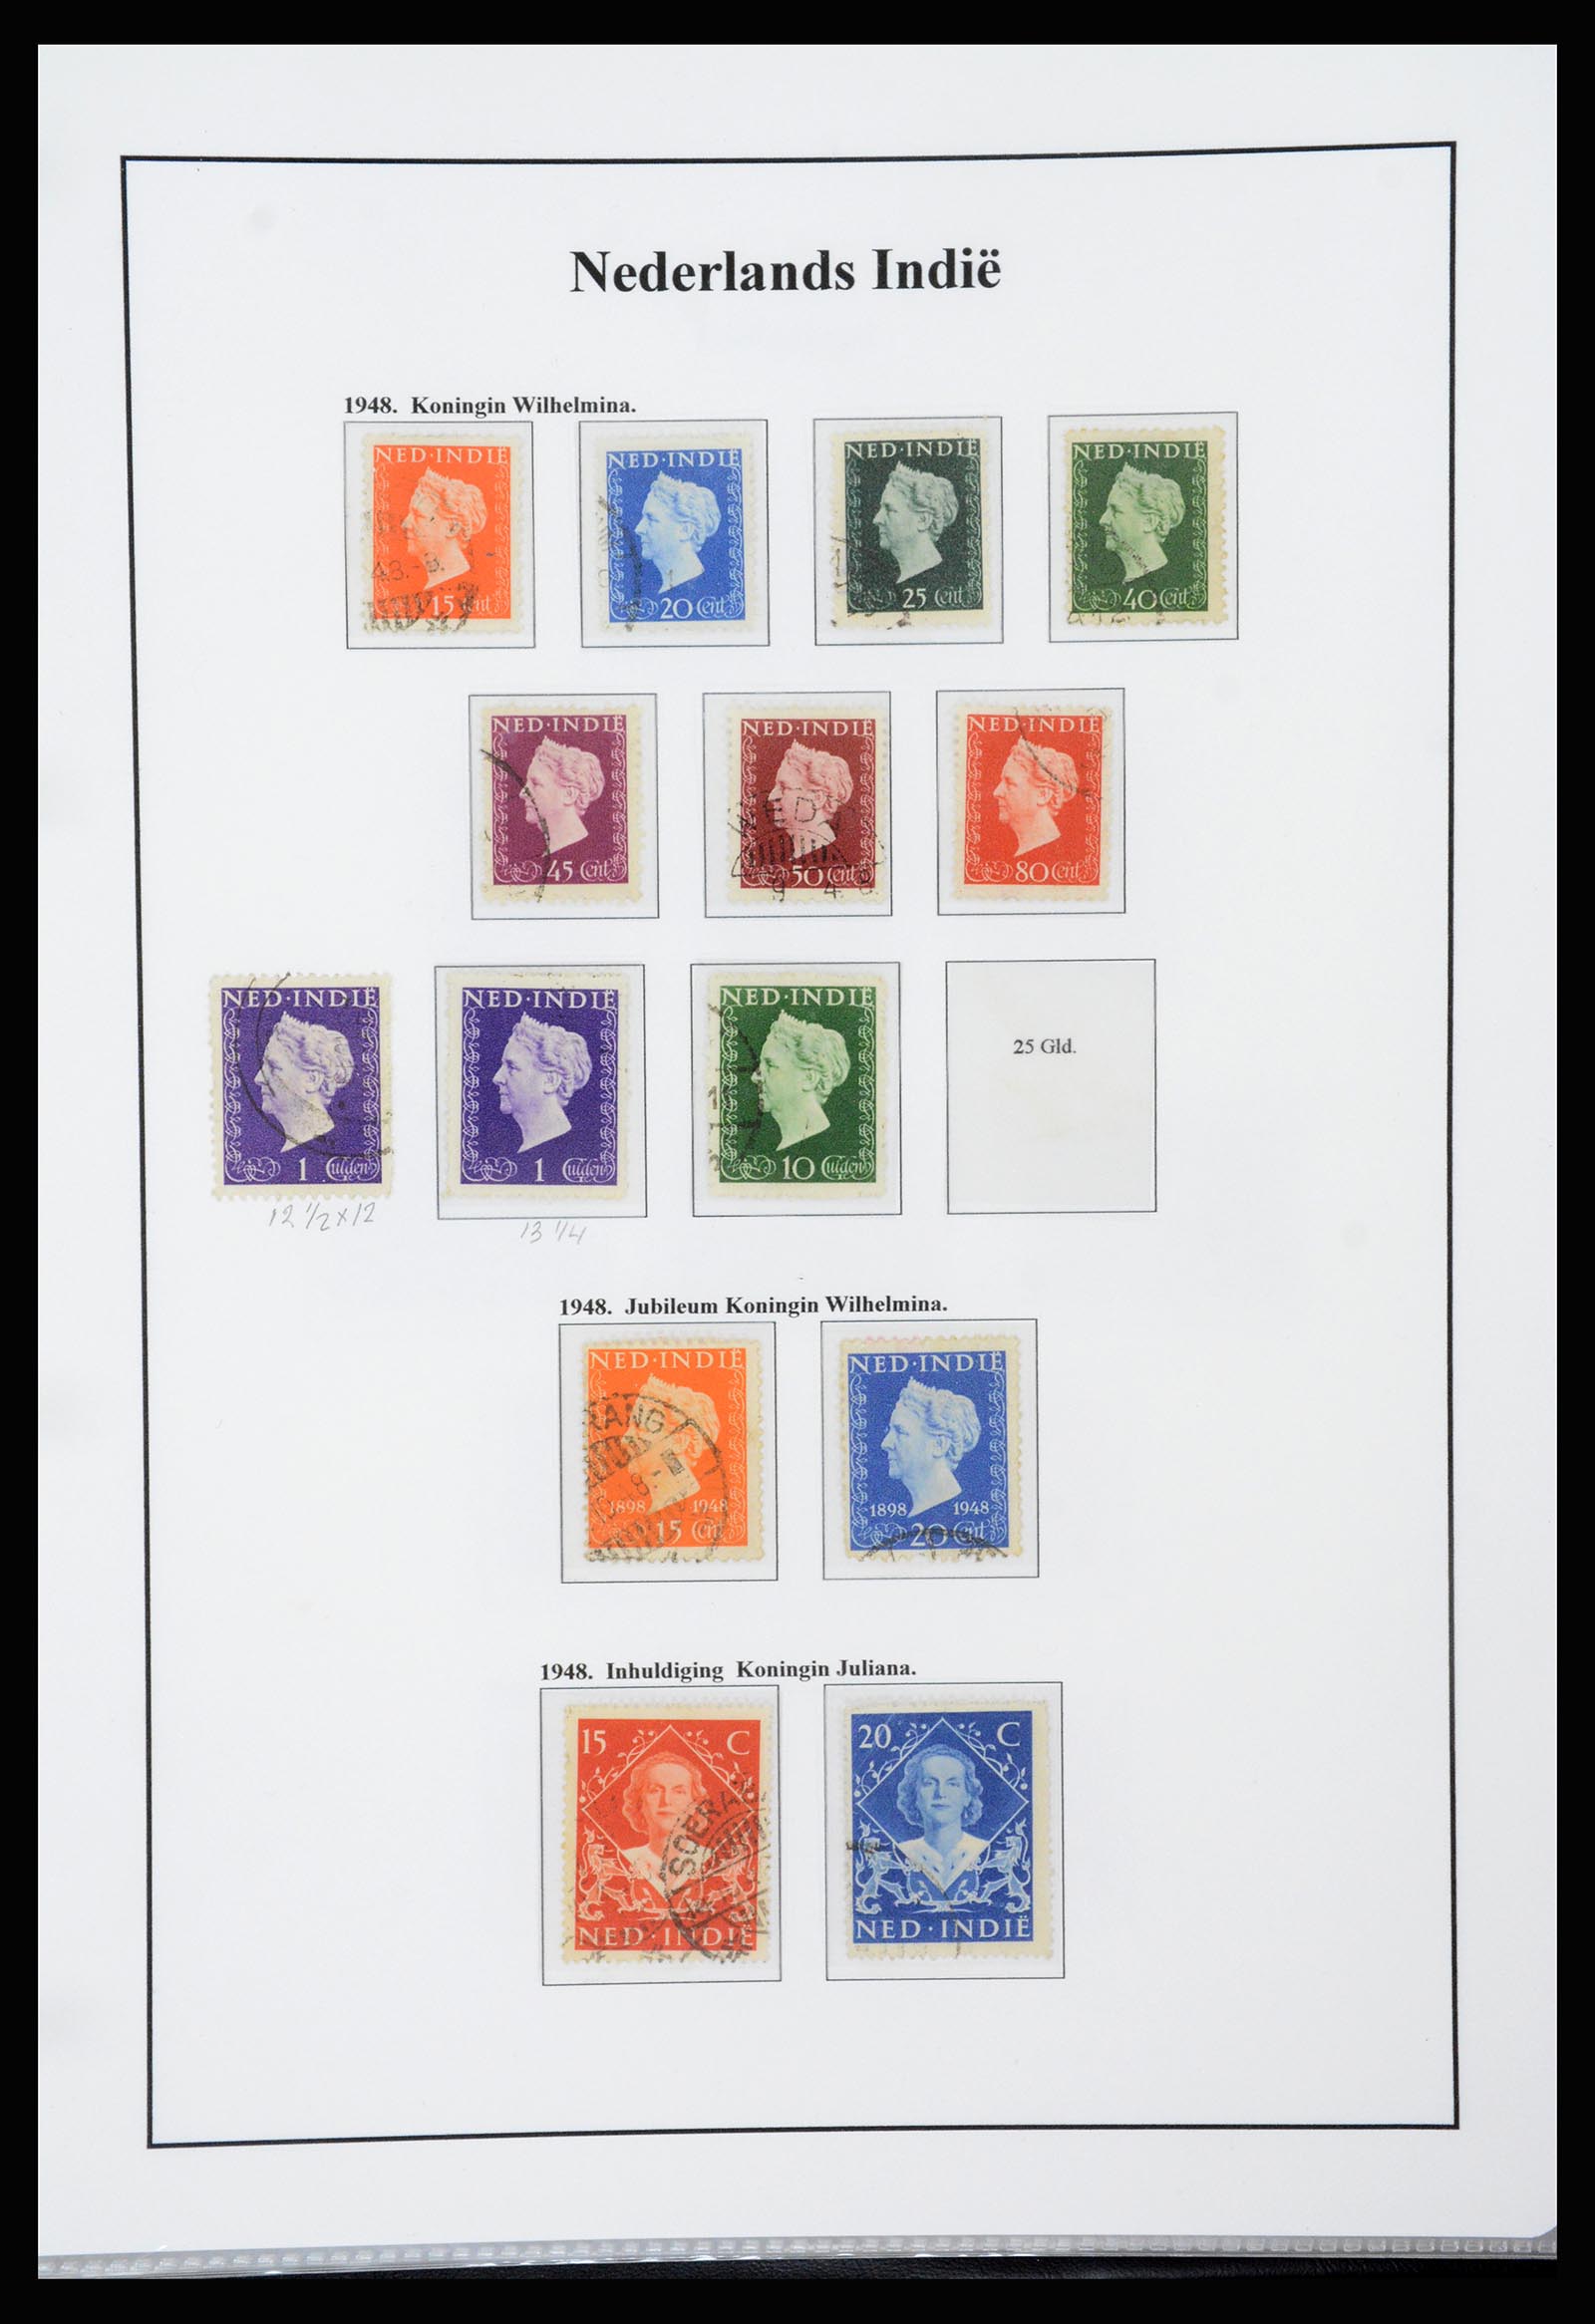 37247 027 - Stamp collection 37247 Dutch east Indies 1864-1949.